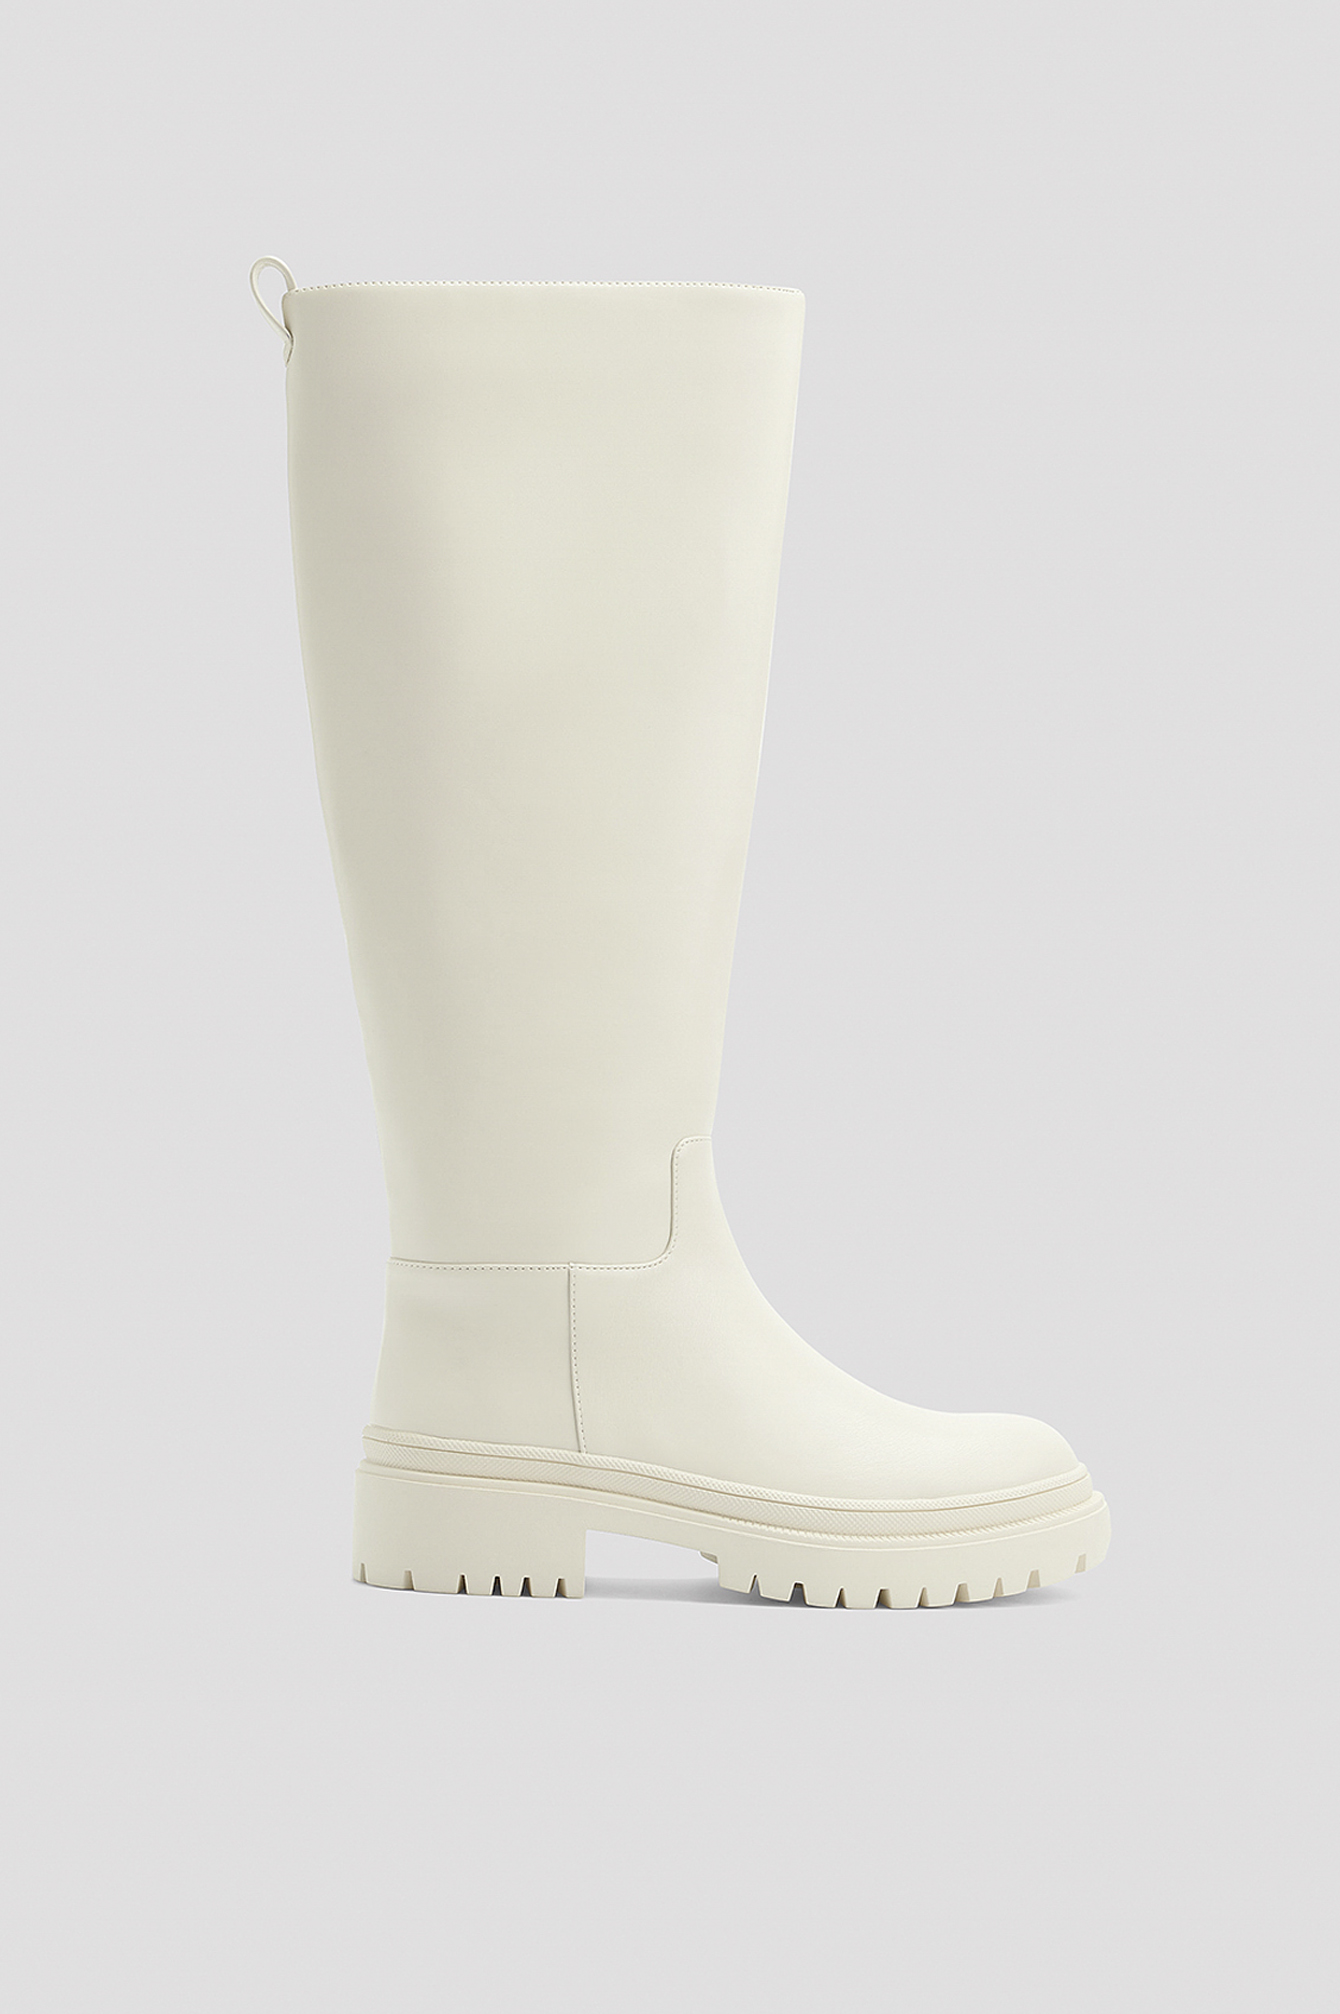 na-kd shoes -  Schaft-Stiefel mit Profil-Sohle - Offwhite